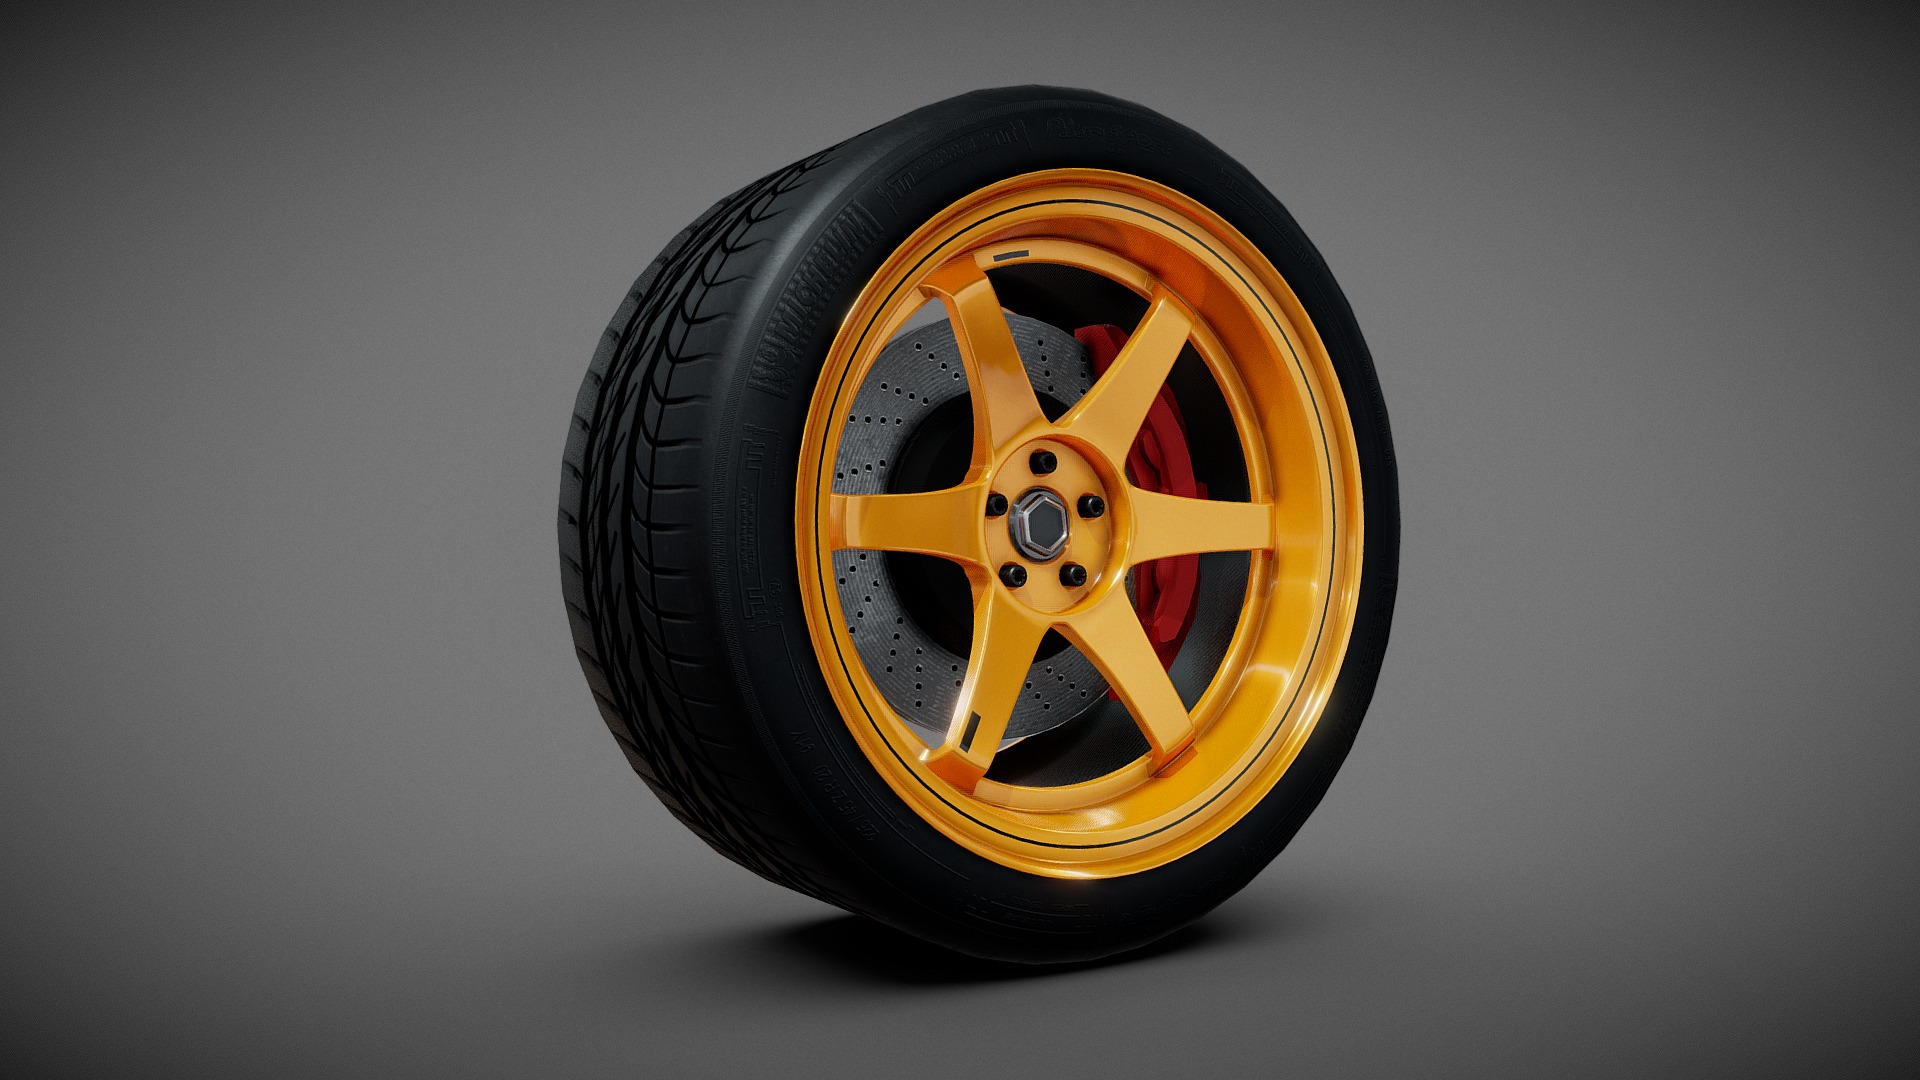 3D model Tune Racing Tire and Rim 1 - This is a 3D model of the Tune Racing Tire and Rim 1. The 3D model is about a black and orange tire.